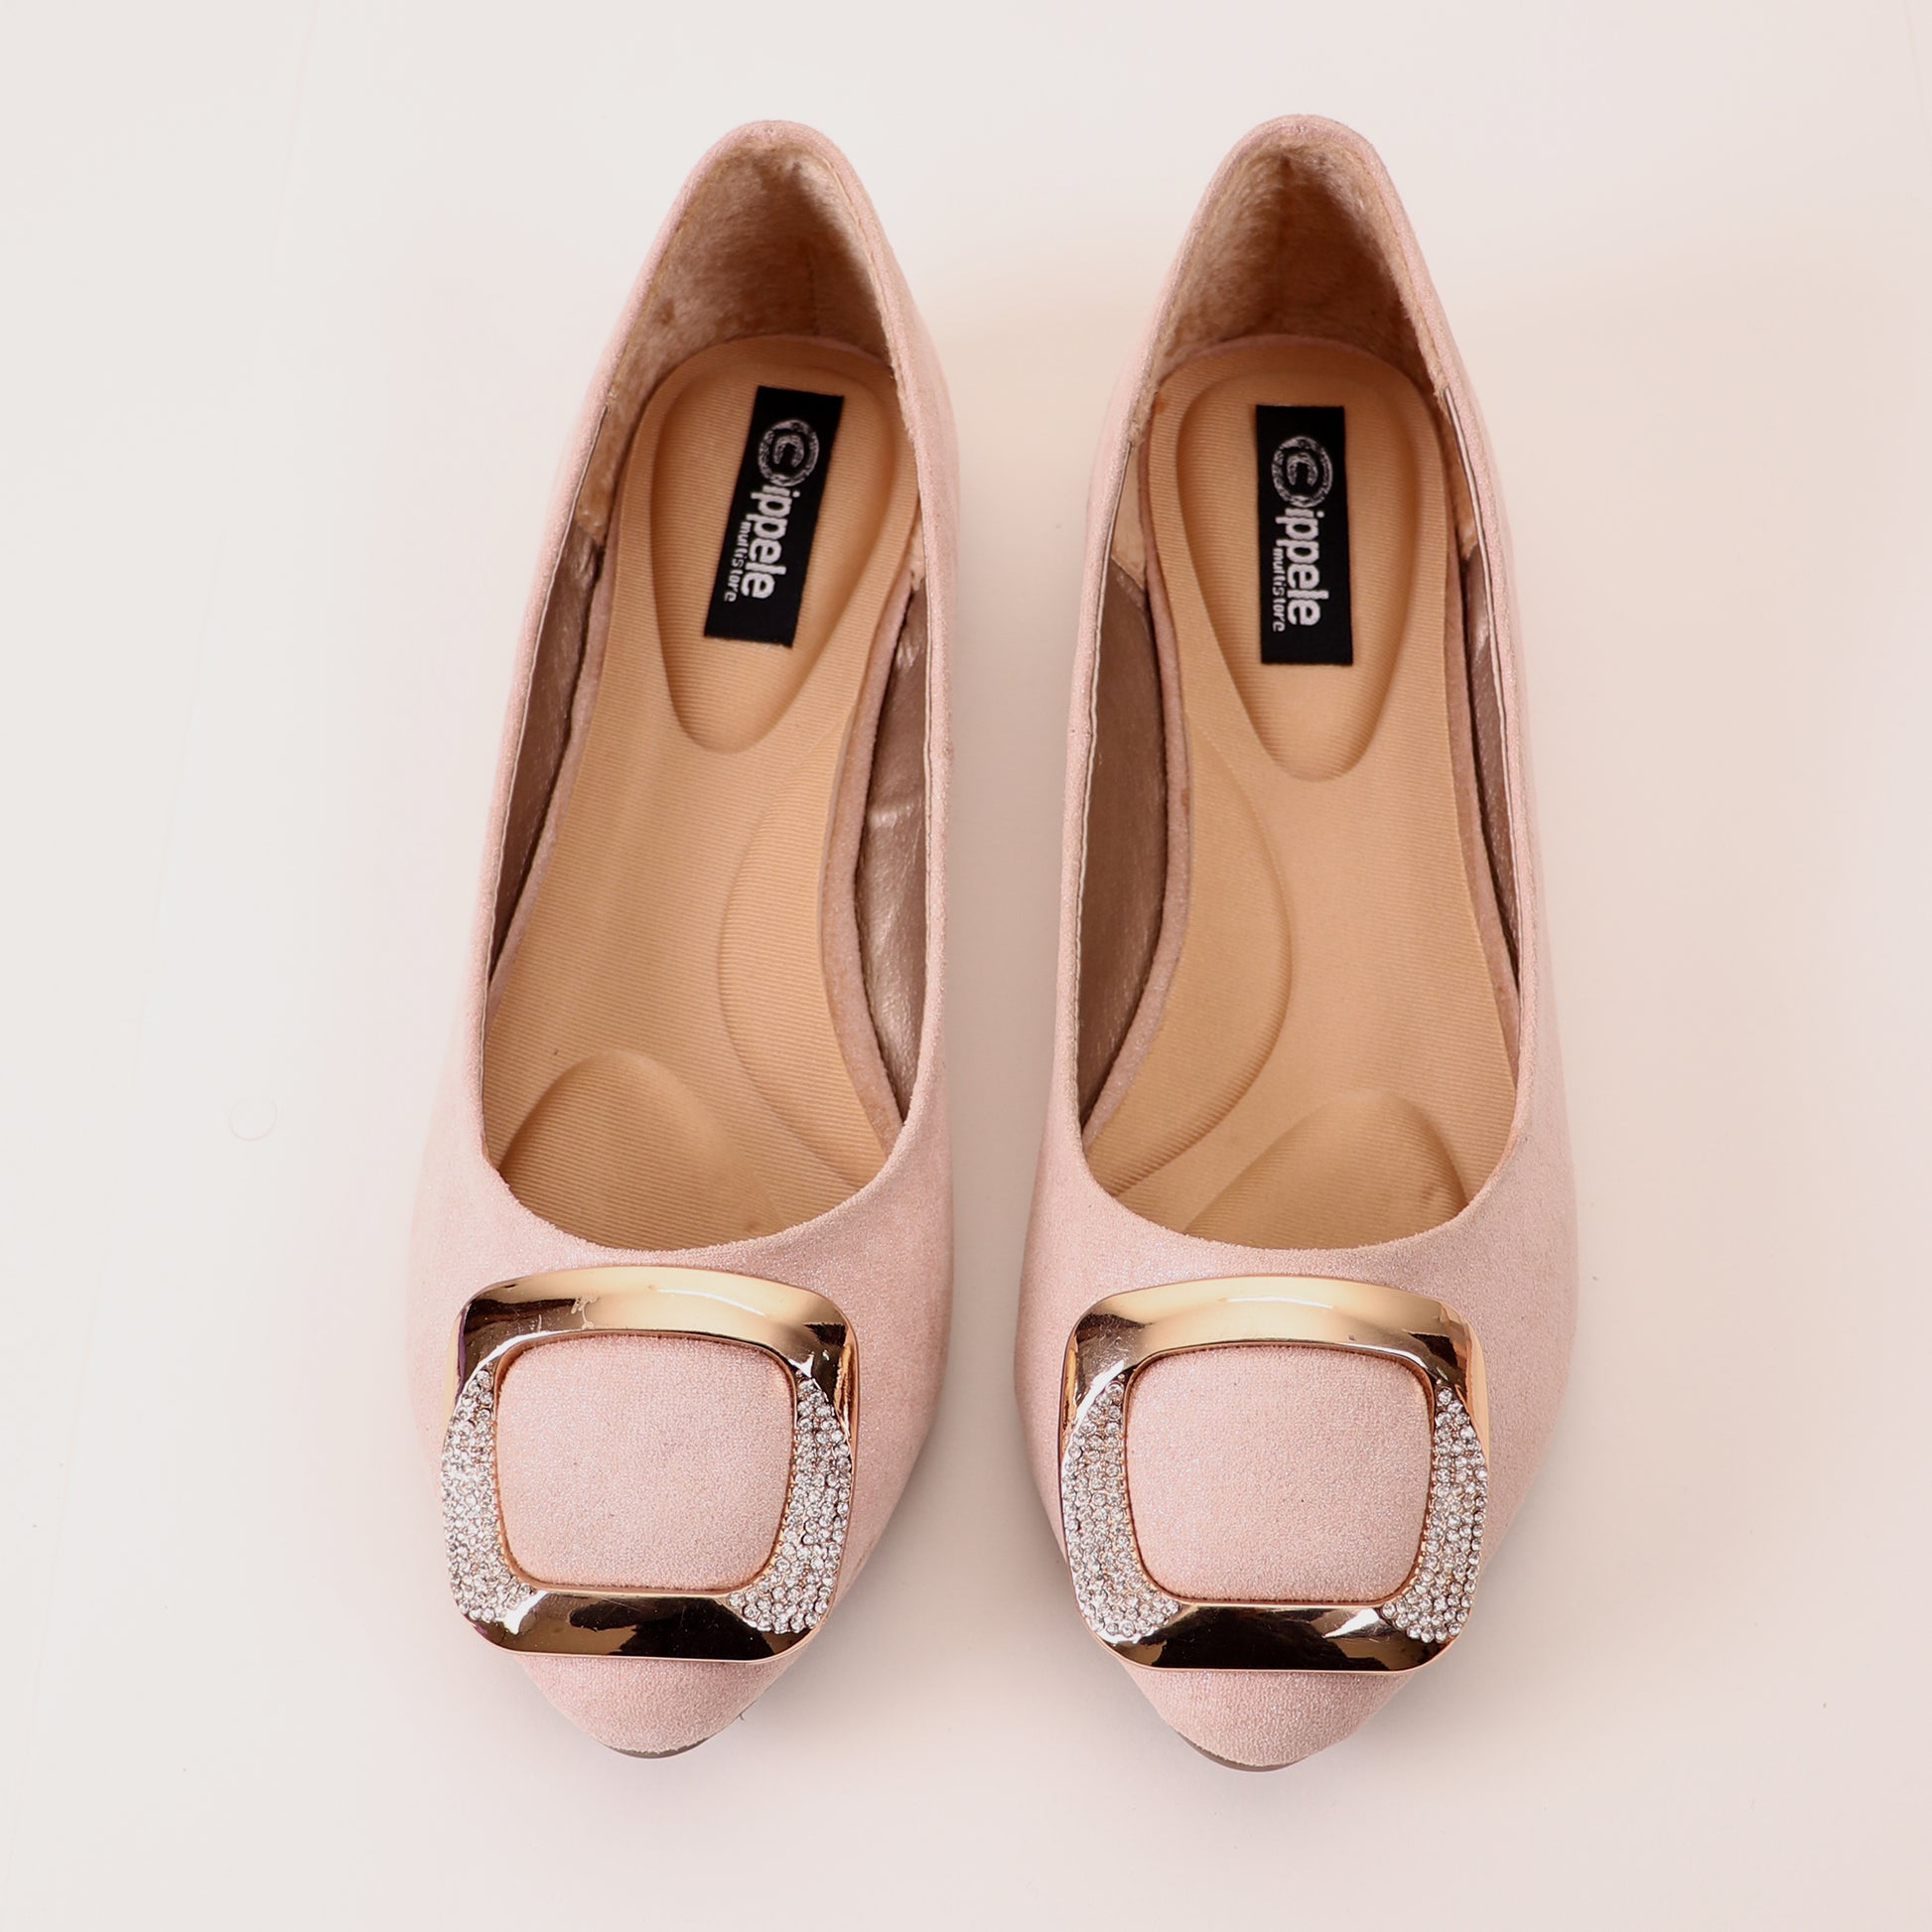 Foot Wear,Everyday Fun Flats in Baby Pink - Cippele Multi Store